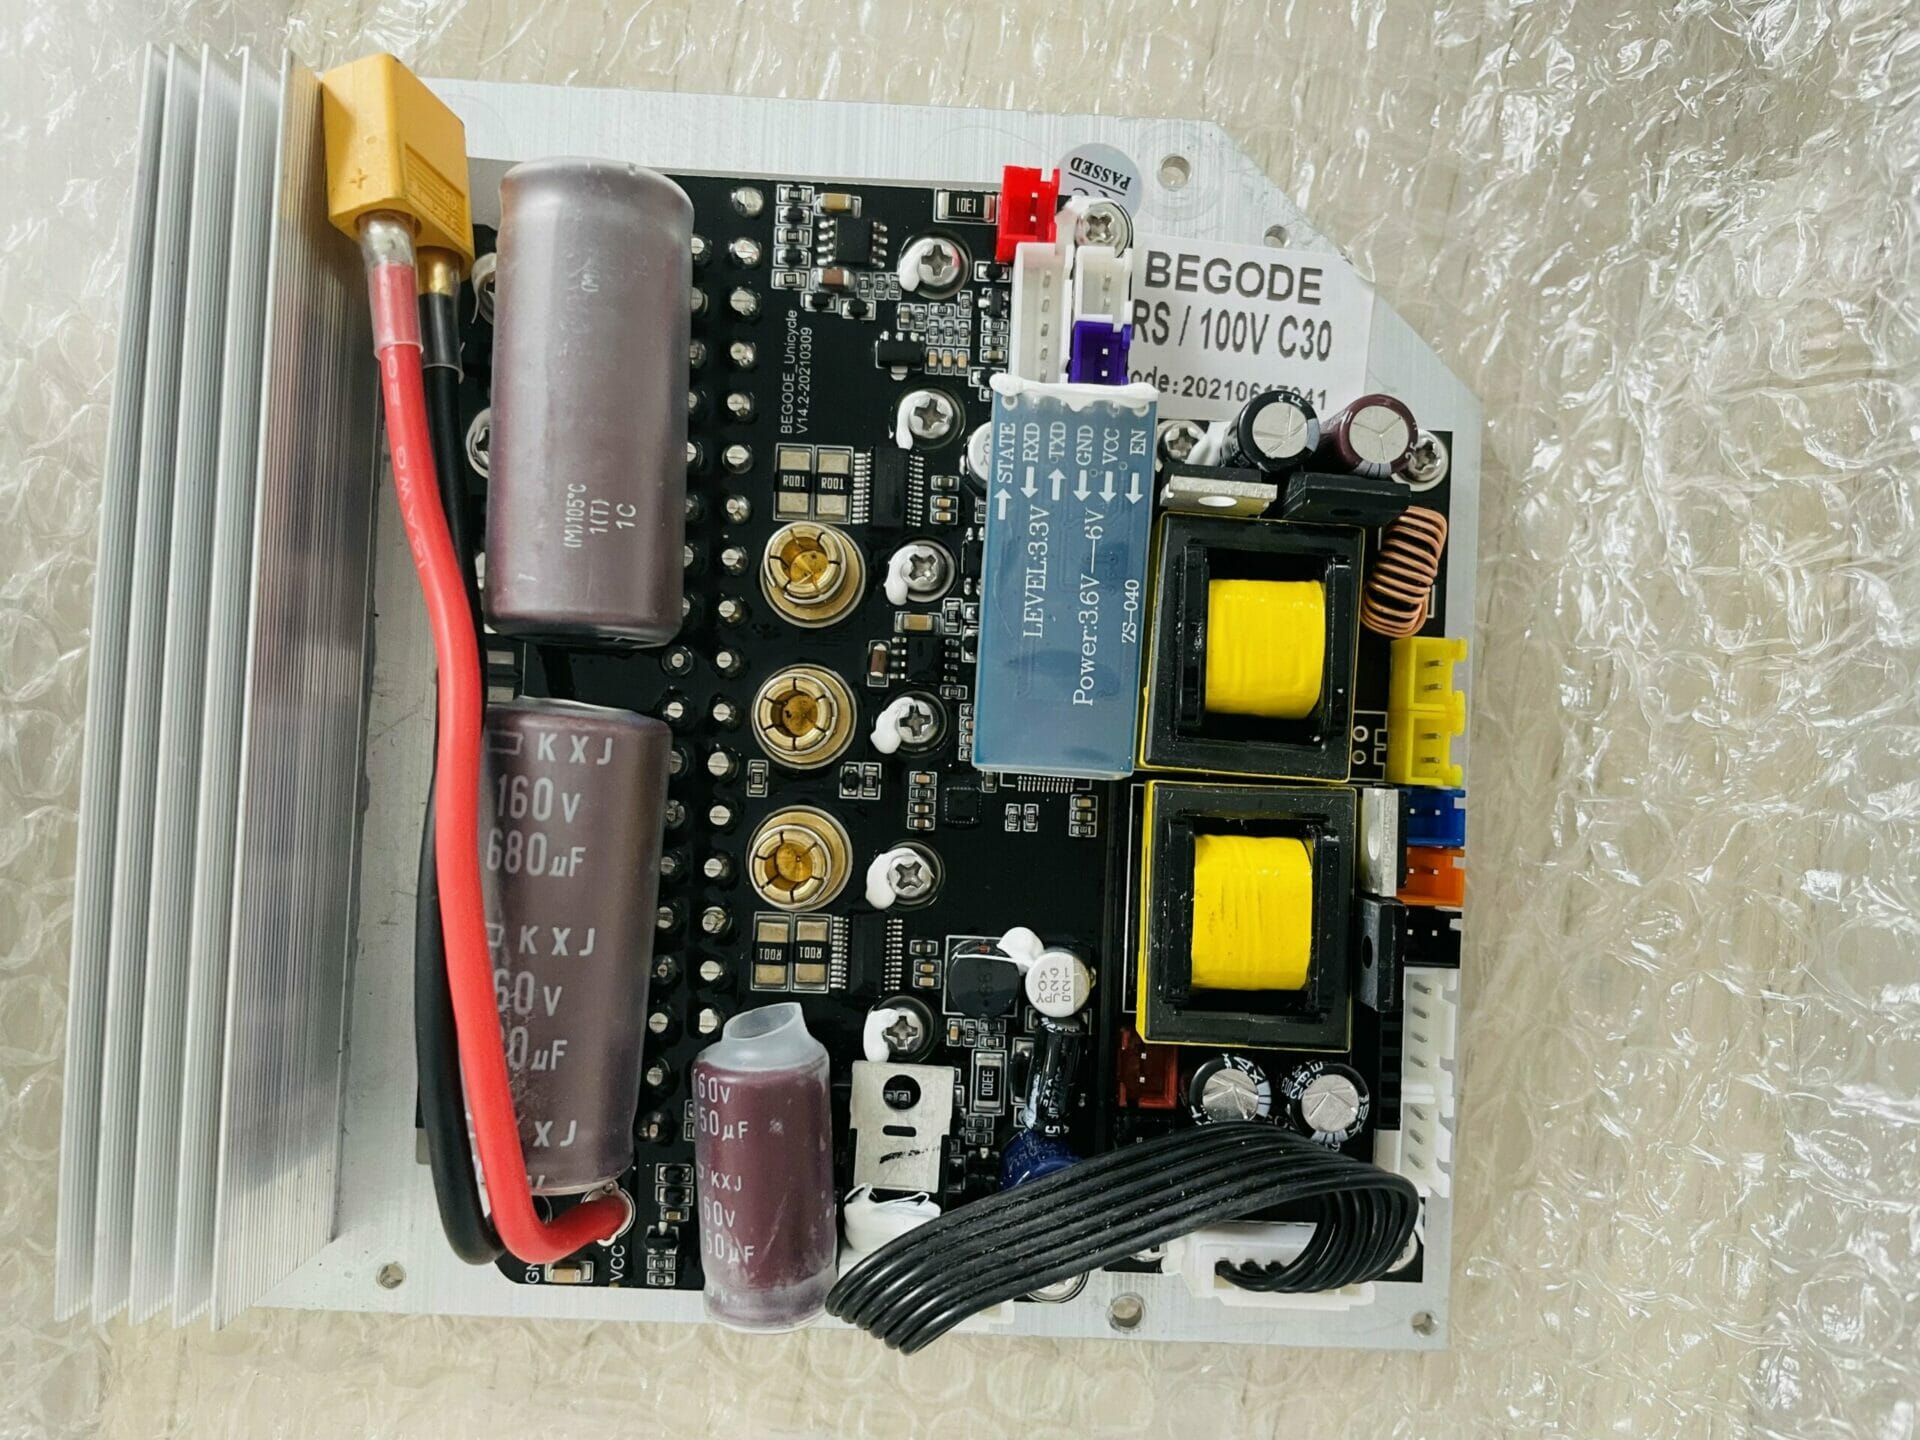 RS19 C30 (Speed) BLACK MAINBOARD Begode (Gotway) Electric Unicycle Control board (Mainboard)